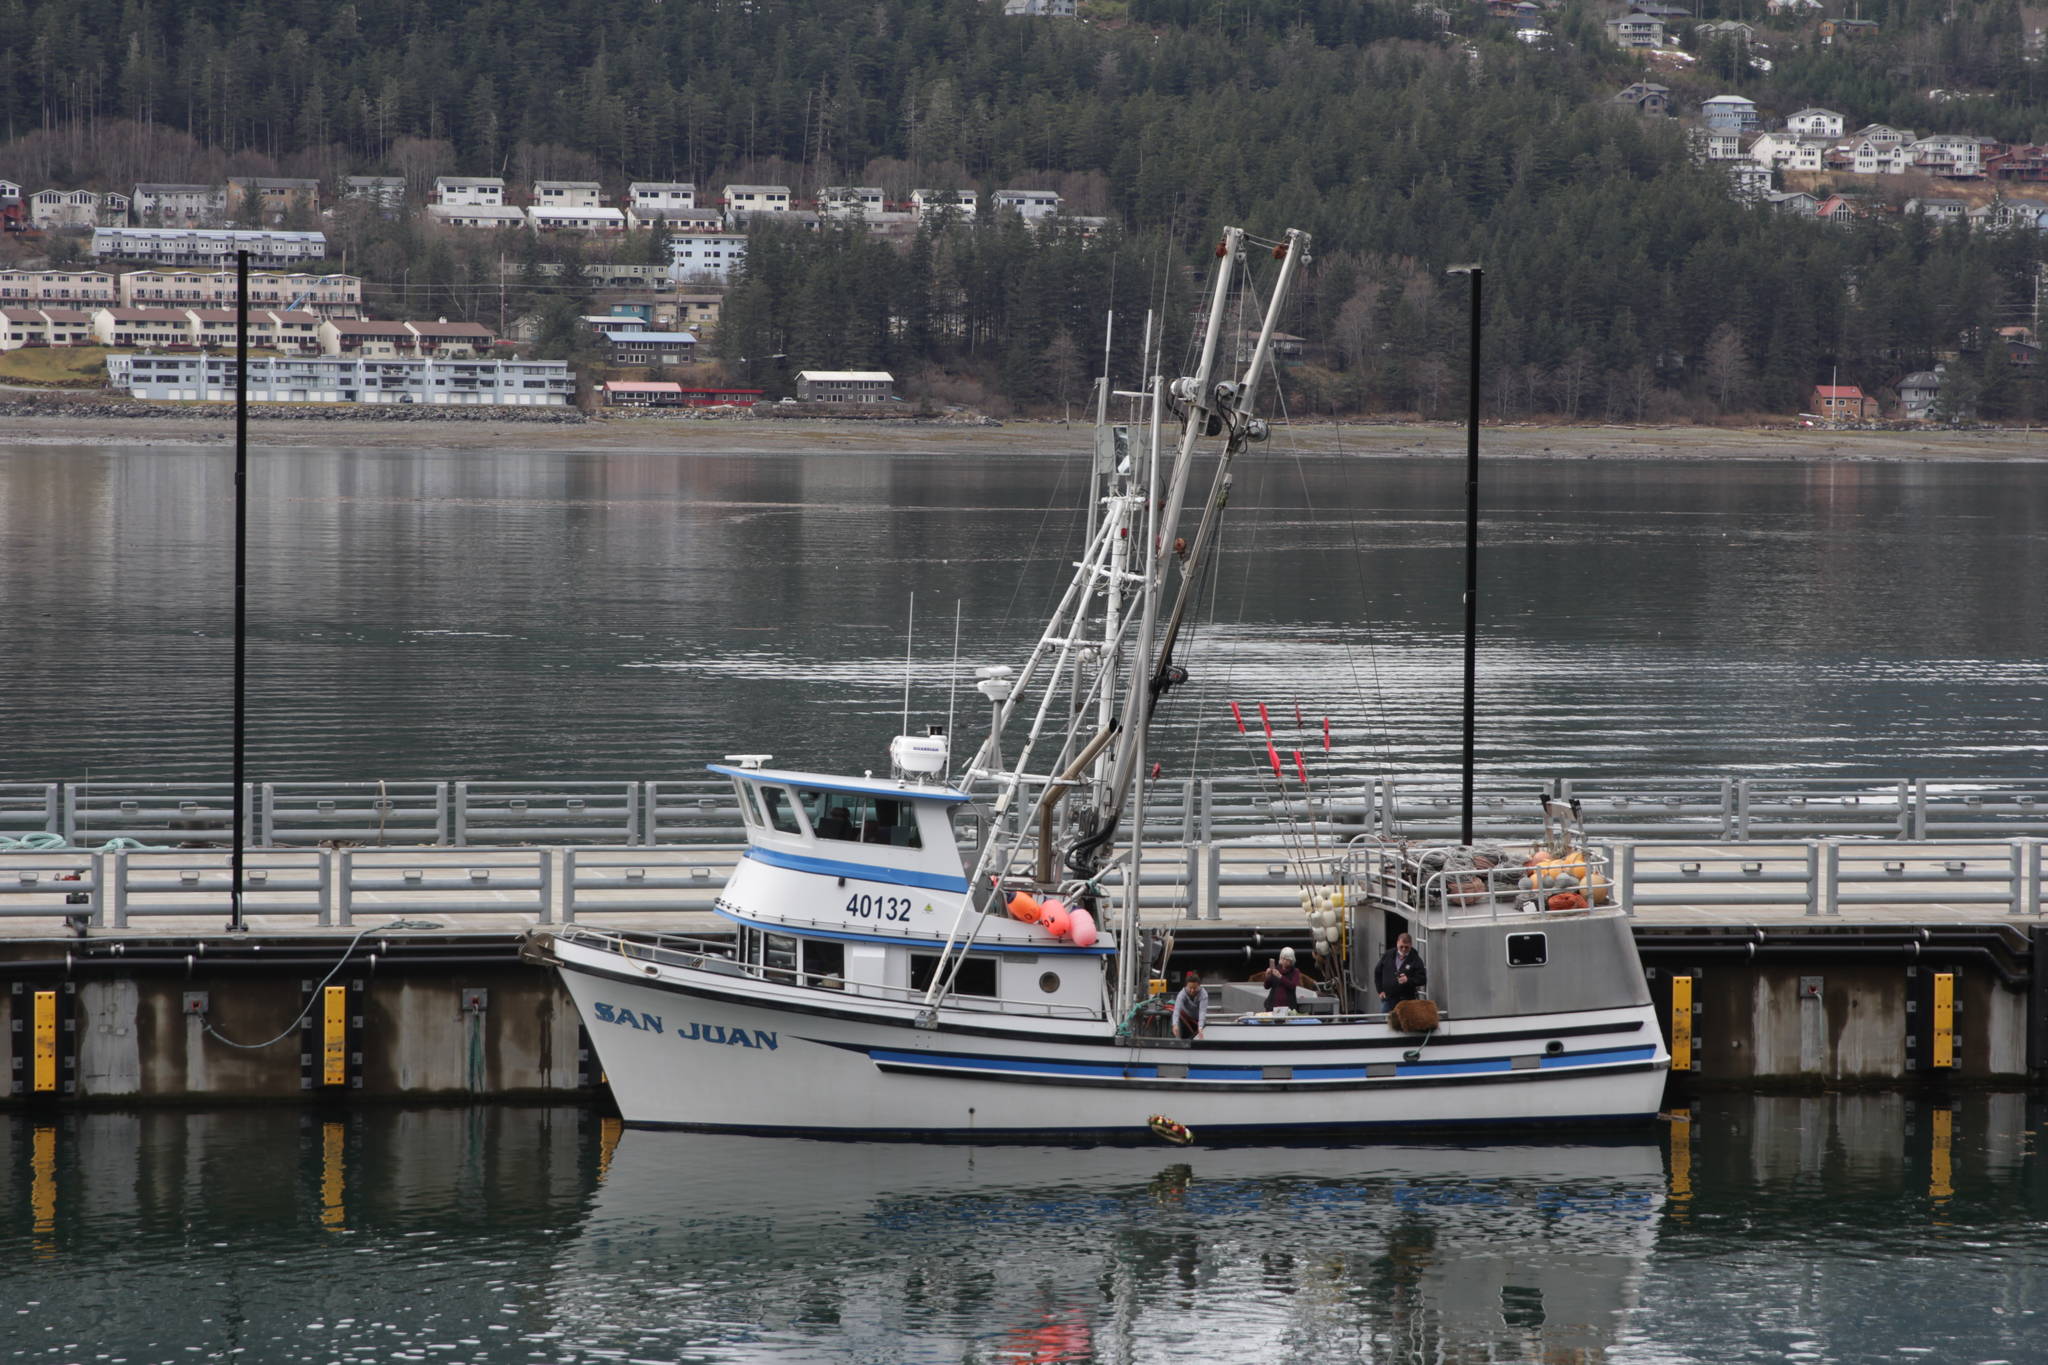 The crew of the fishing vessel San Juan release a memorial wreath into the Gastineau Channel during the 31st annual Blessing of the Fleet and Reading of Names at the Alaska Commercial Fishermen’s Memorial in Juneau on May 1, 2021. (Michael S. Lockett / Juneau Empire)